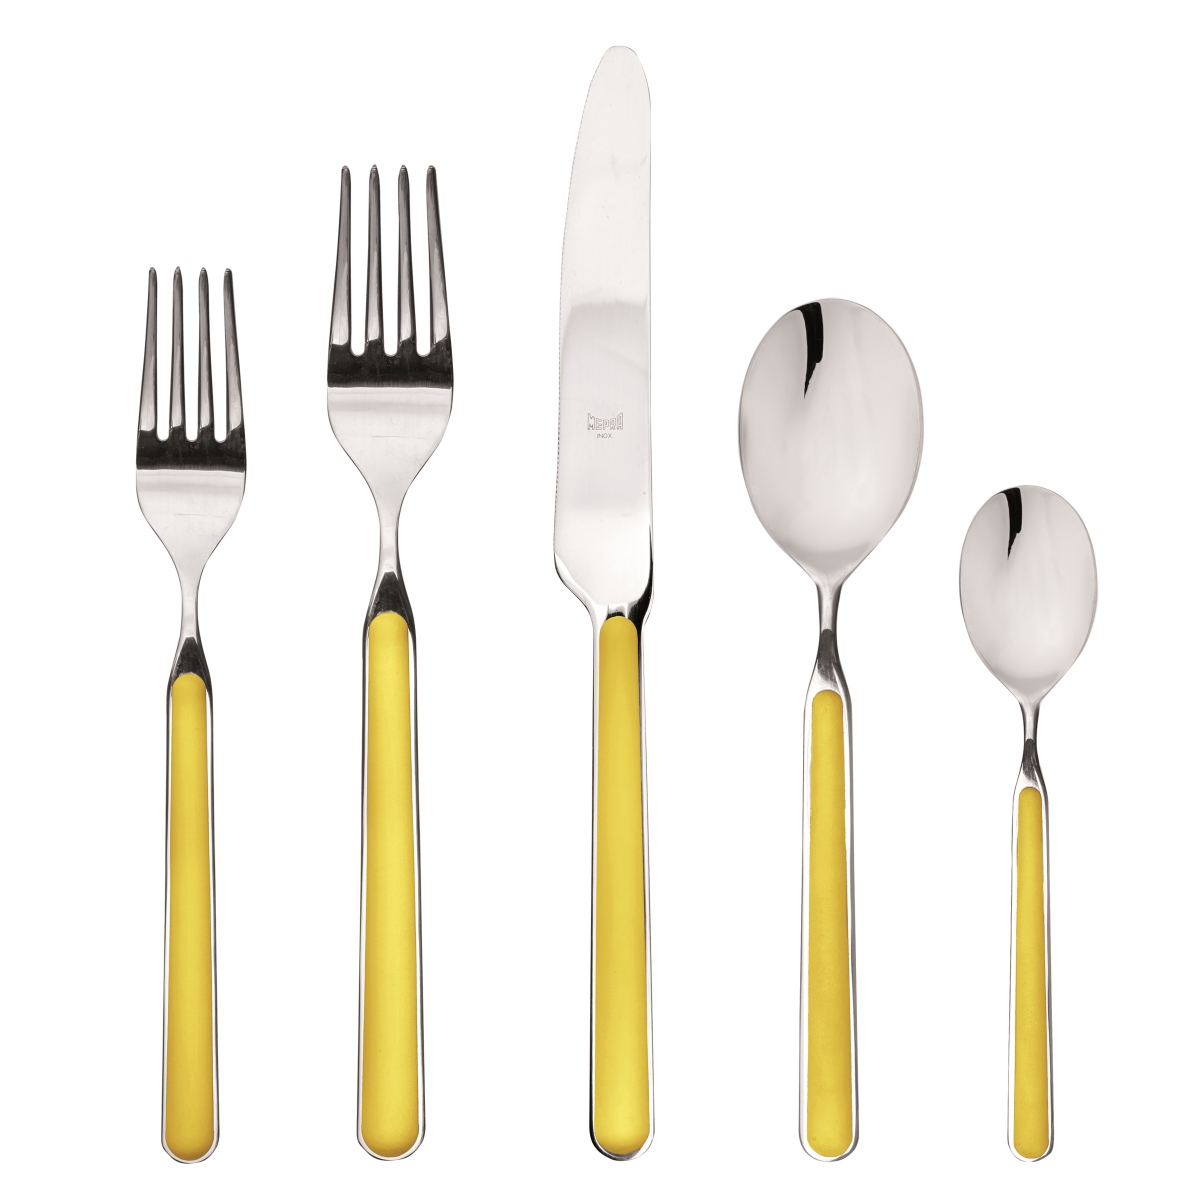 10g622005 Stainless Steel Fantasia Place Set, Yellow - 5 Piece